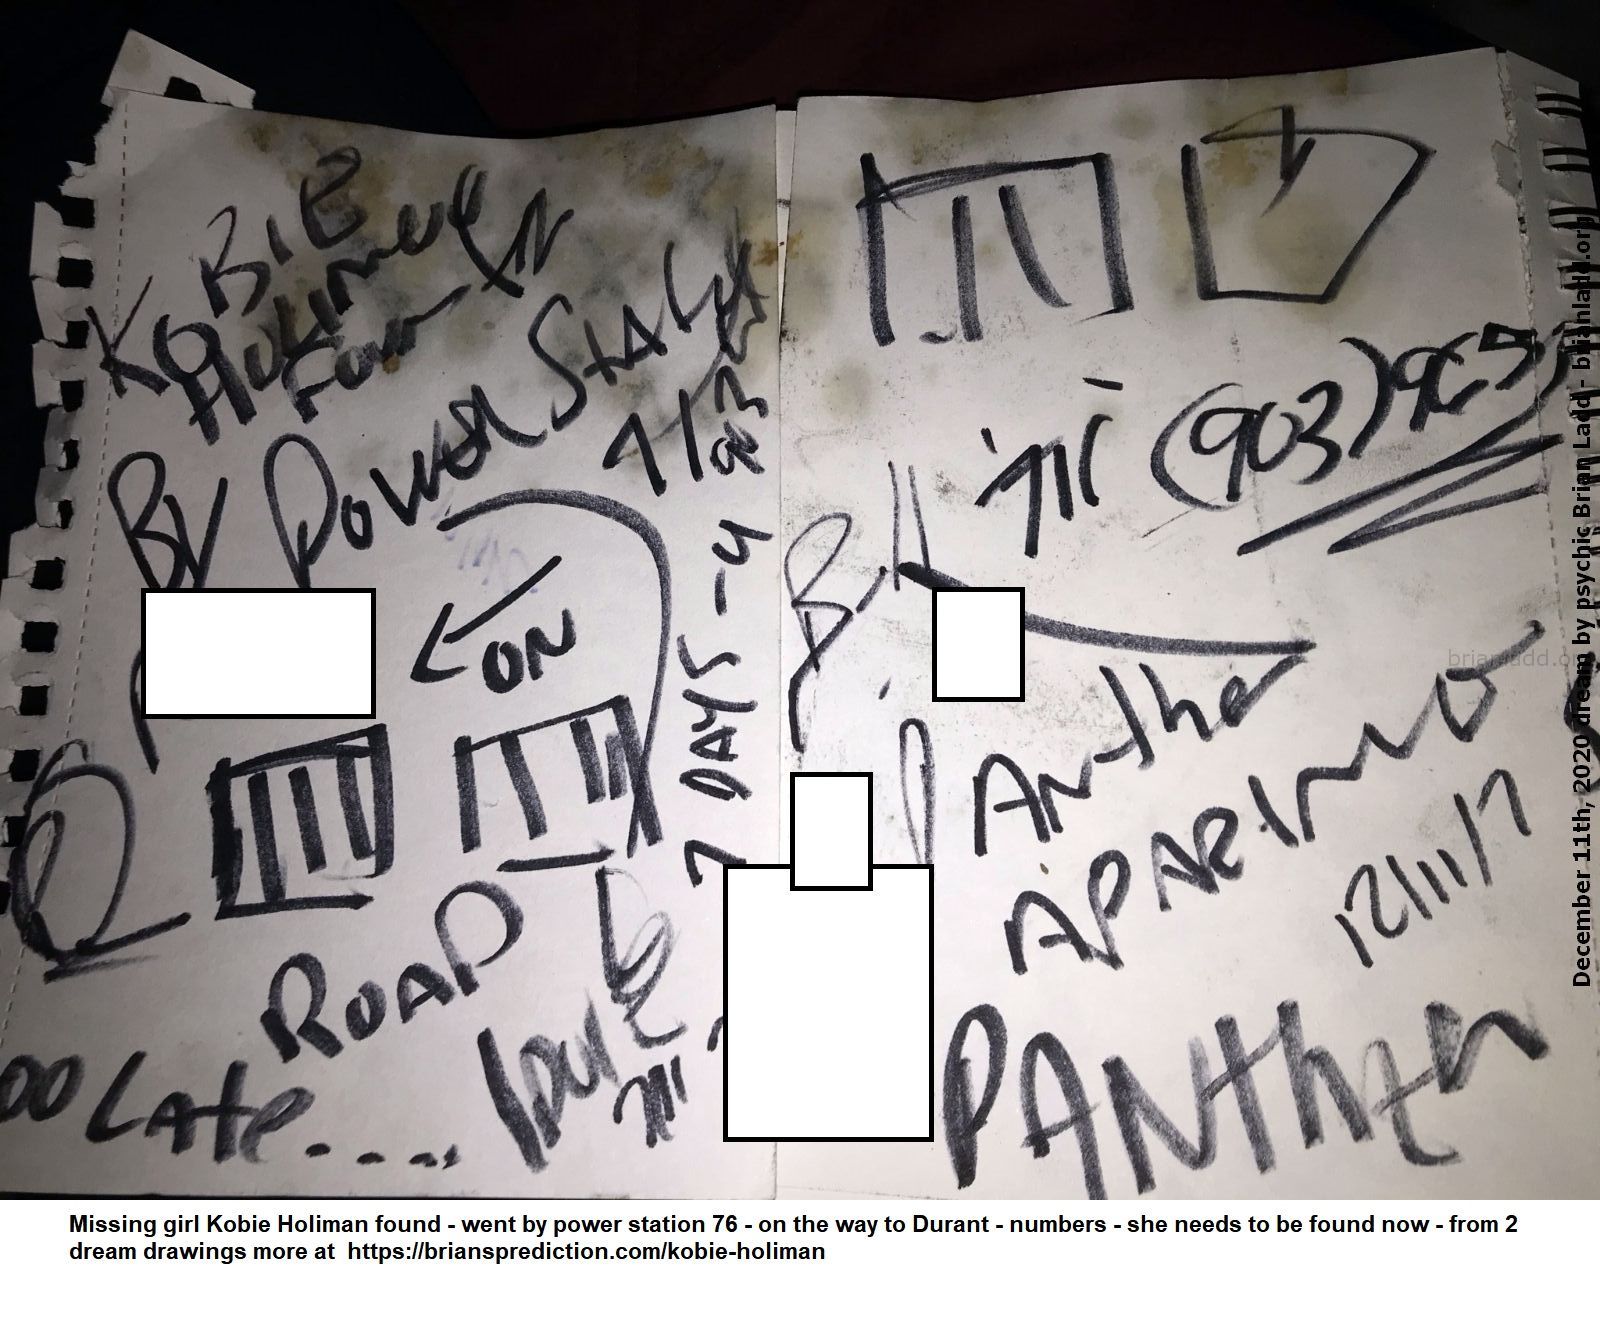 14162 10 December 2020 3 - Missing Girl Kobie Holiman Found - Went By Power Station 76 - On The Way To Durant - Numbers ...
Missing Girl Kobie Holiman Found - Went By Power Station 76 - On The Way To Durant - Numbers - She Needs To Be Found Now - From 2 Dream Drawings More At   https://briansprediction.com/Kobie-Holiman
